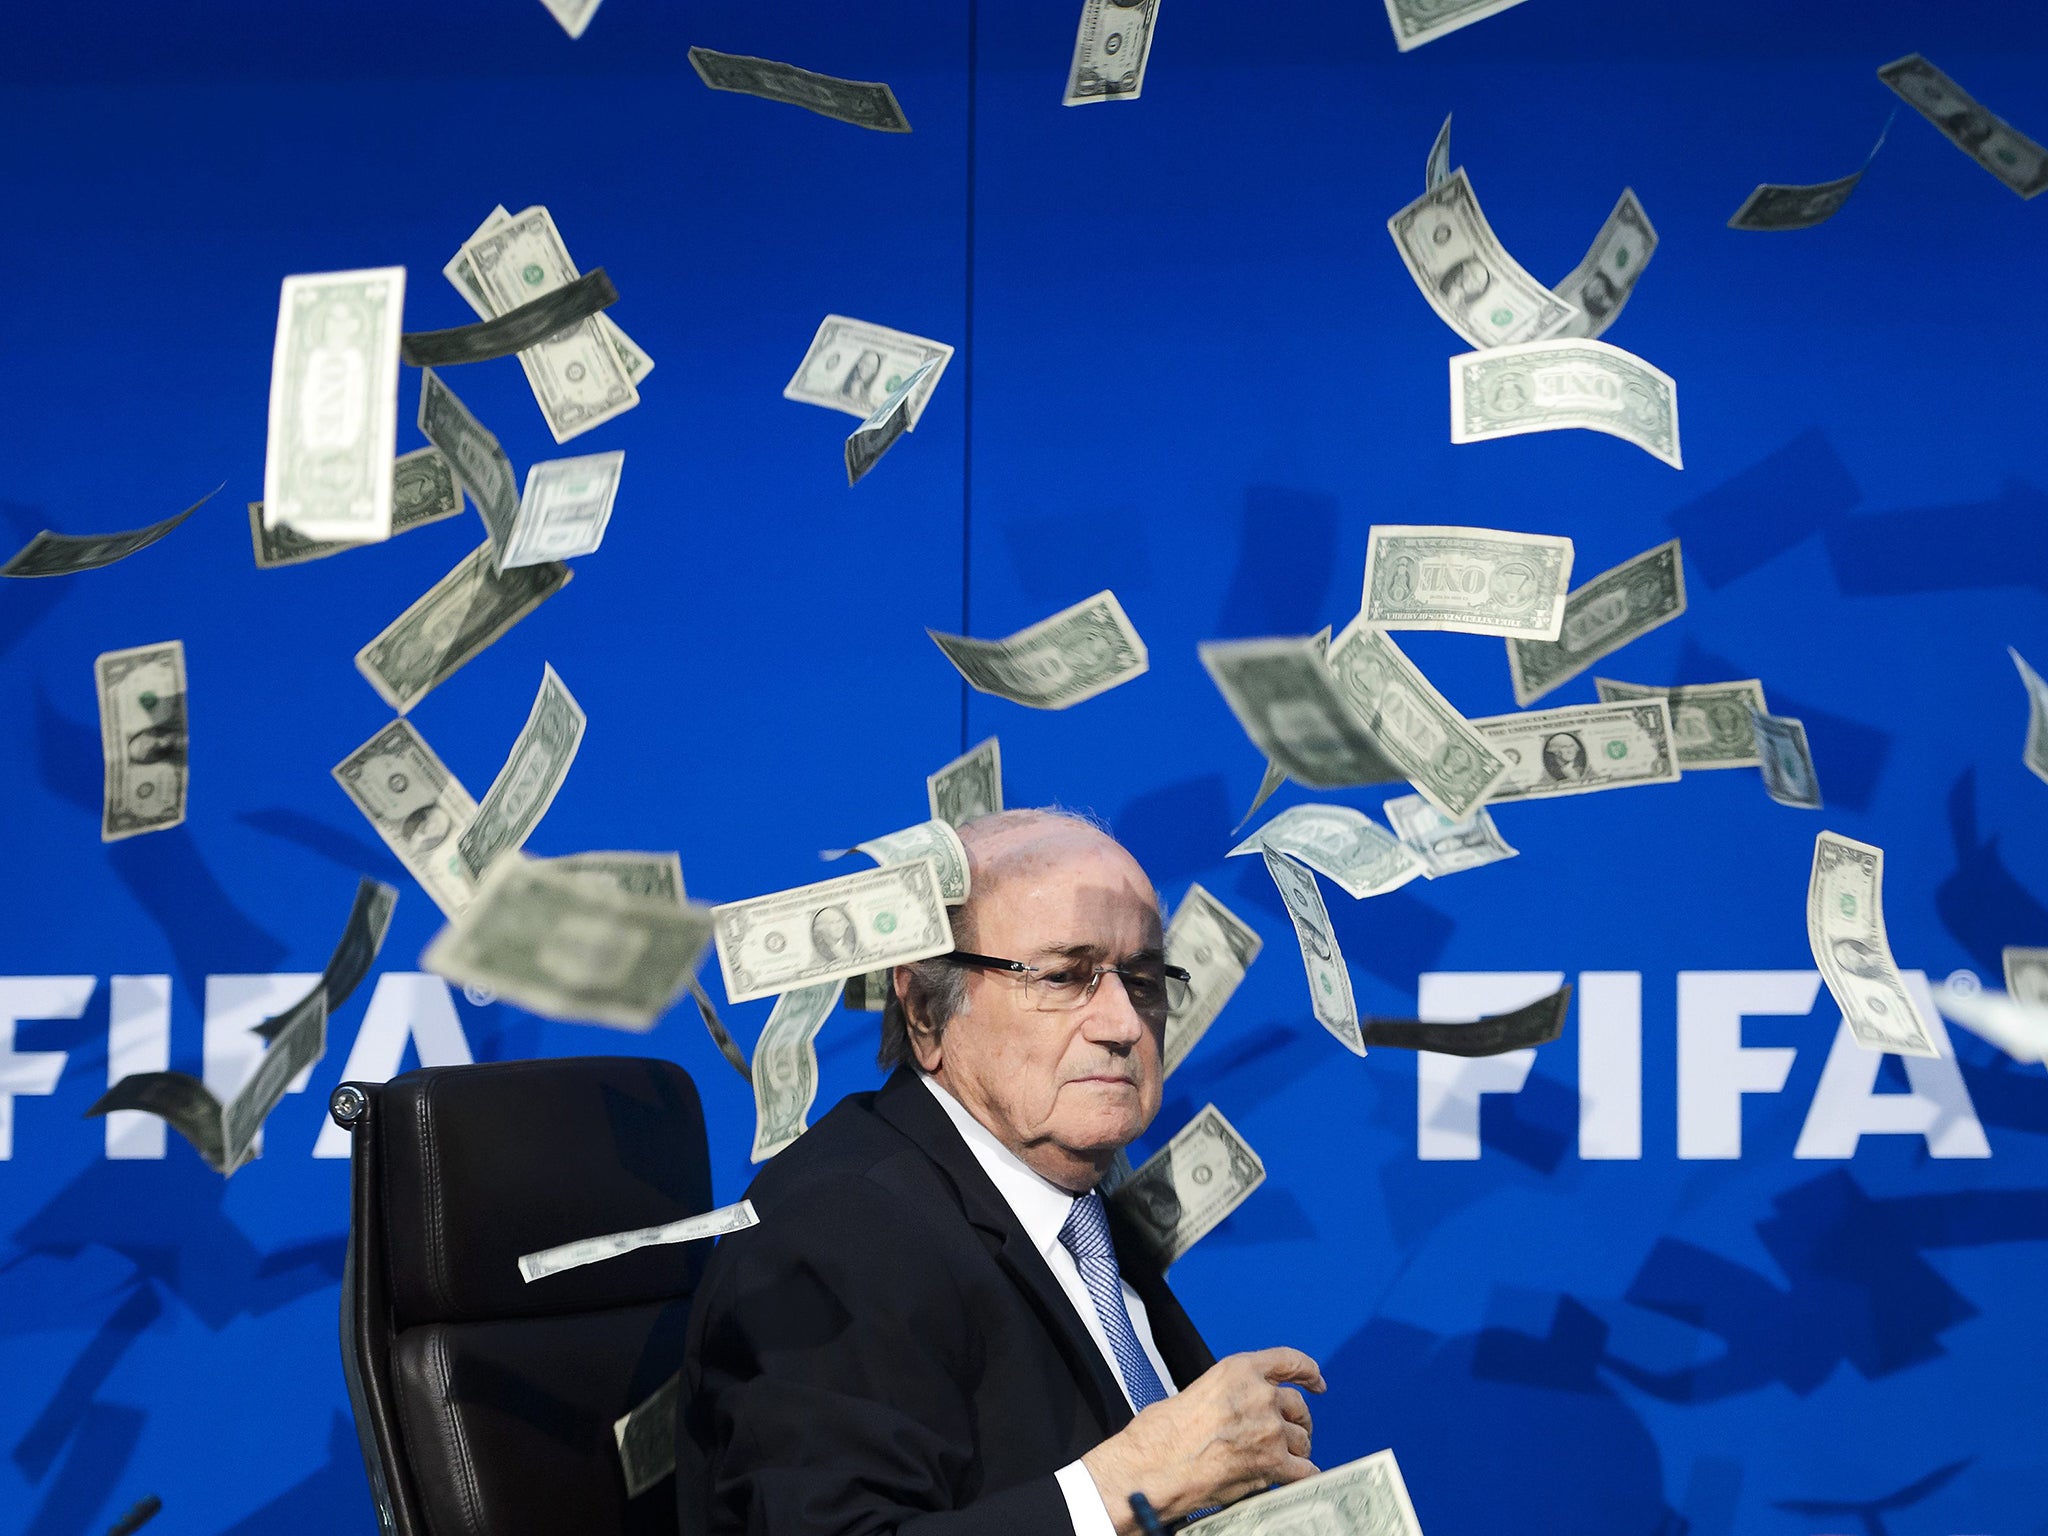 FIFA president Sepp Blatter showered with fake notes by comedian Simon Brodkin